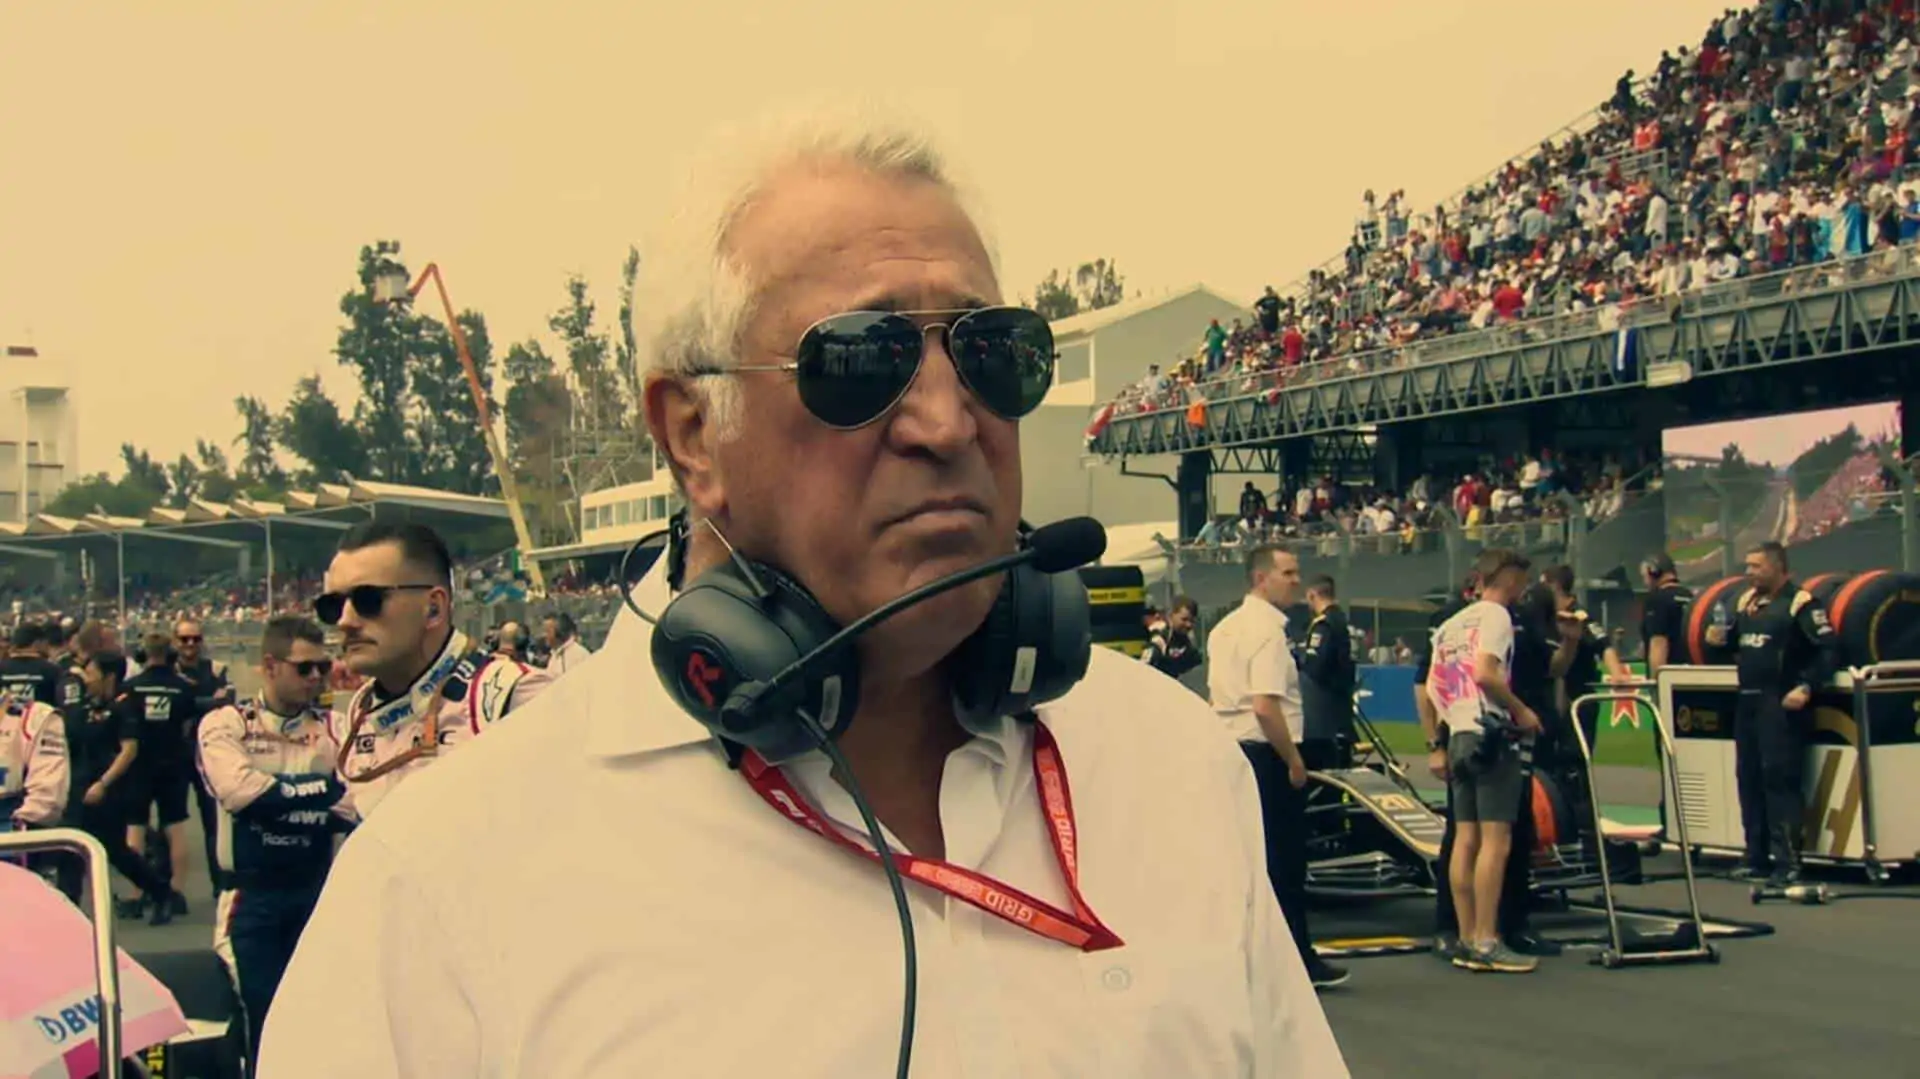 Drive to Survive Sunglasses - Lawrence Stroll wearing Ray-Ban Aviator Sunglasses